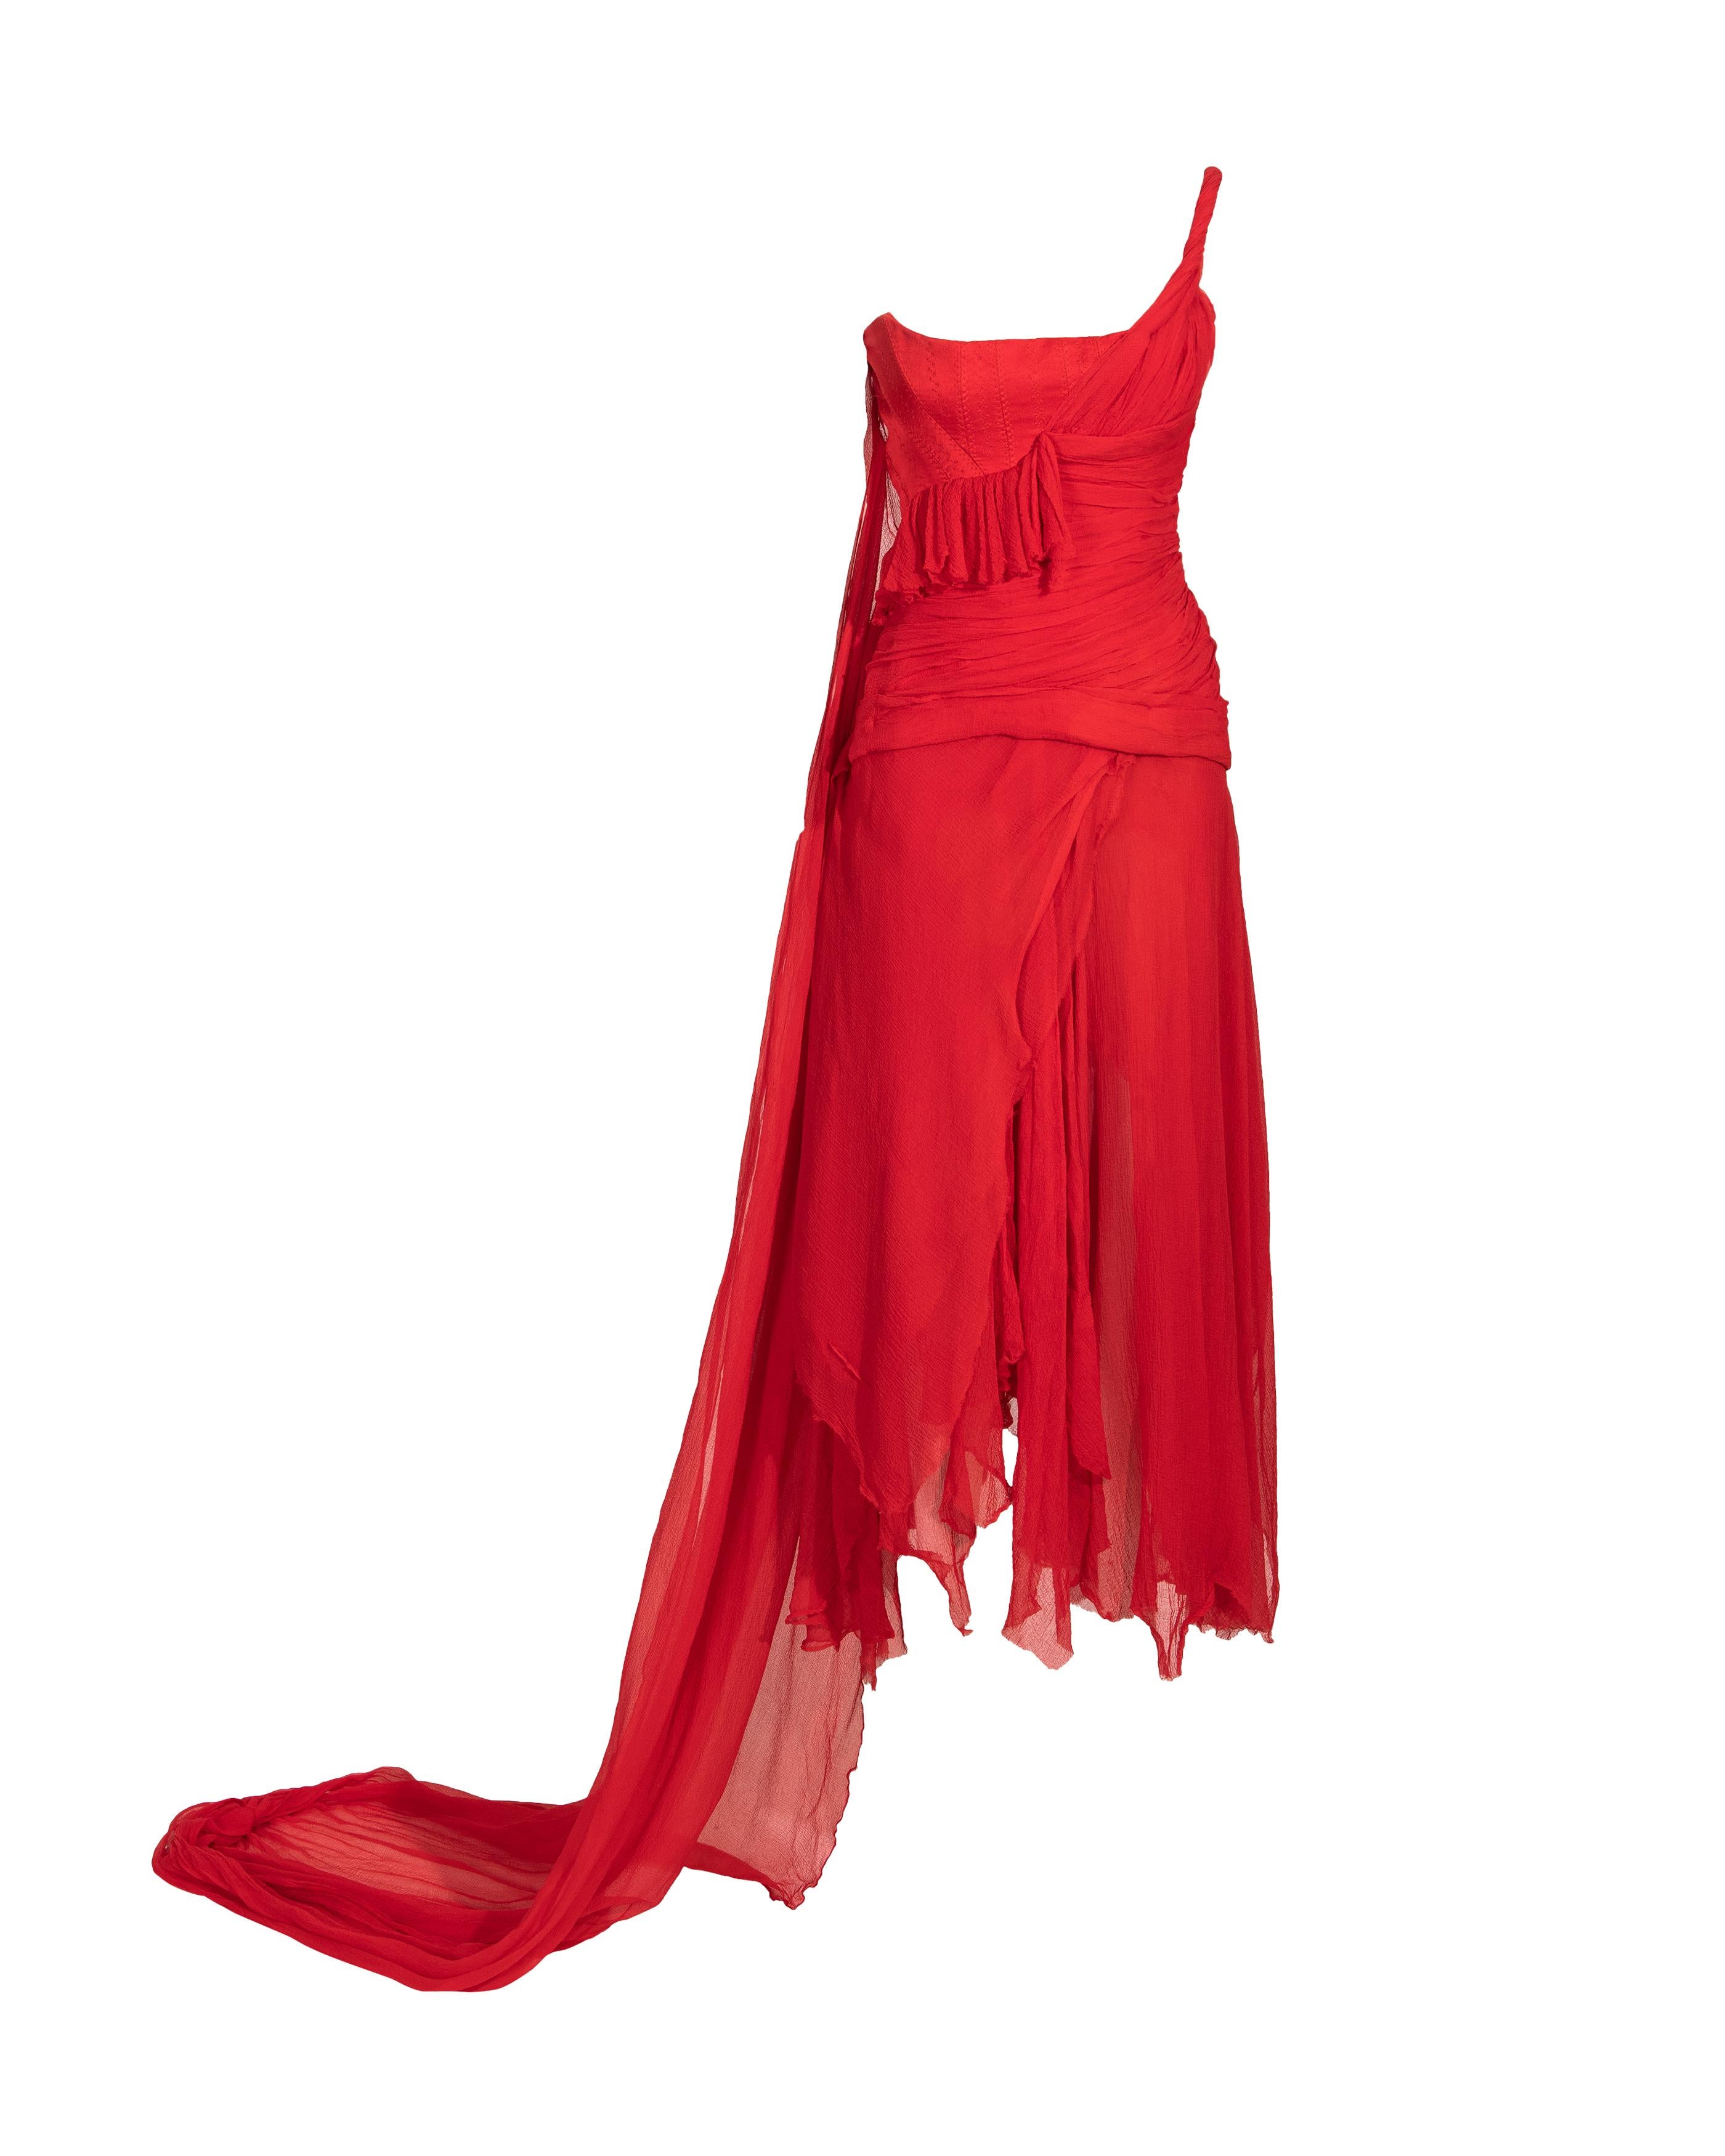 S/S 2003 Alexander McQueen  'Irere' Collection Red Silk Chiffon Gown with Sash 5